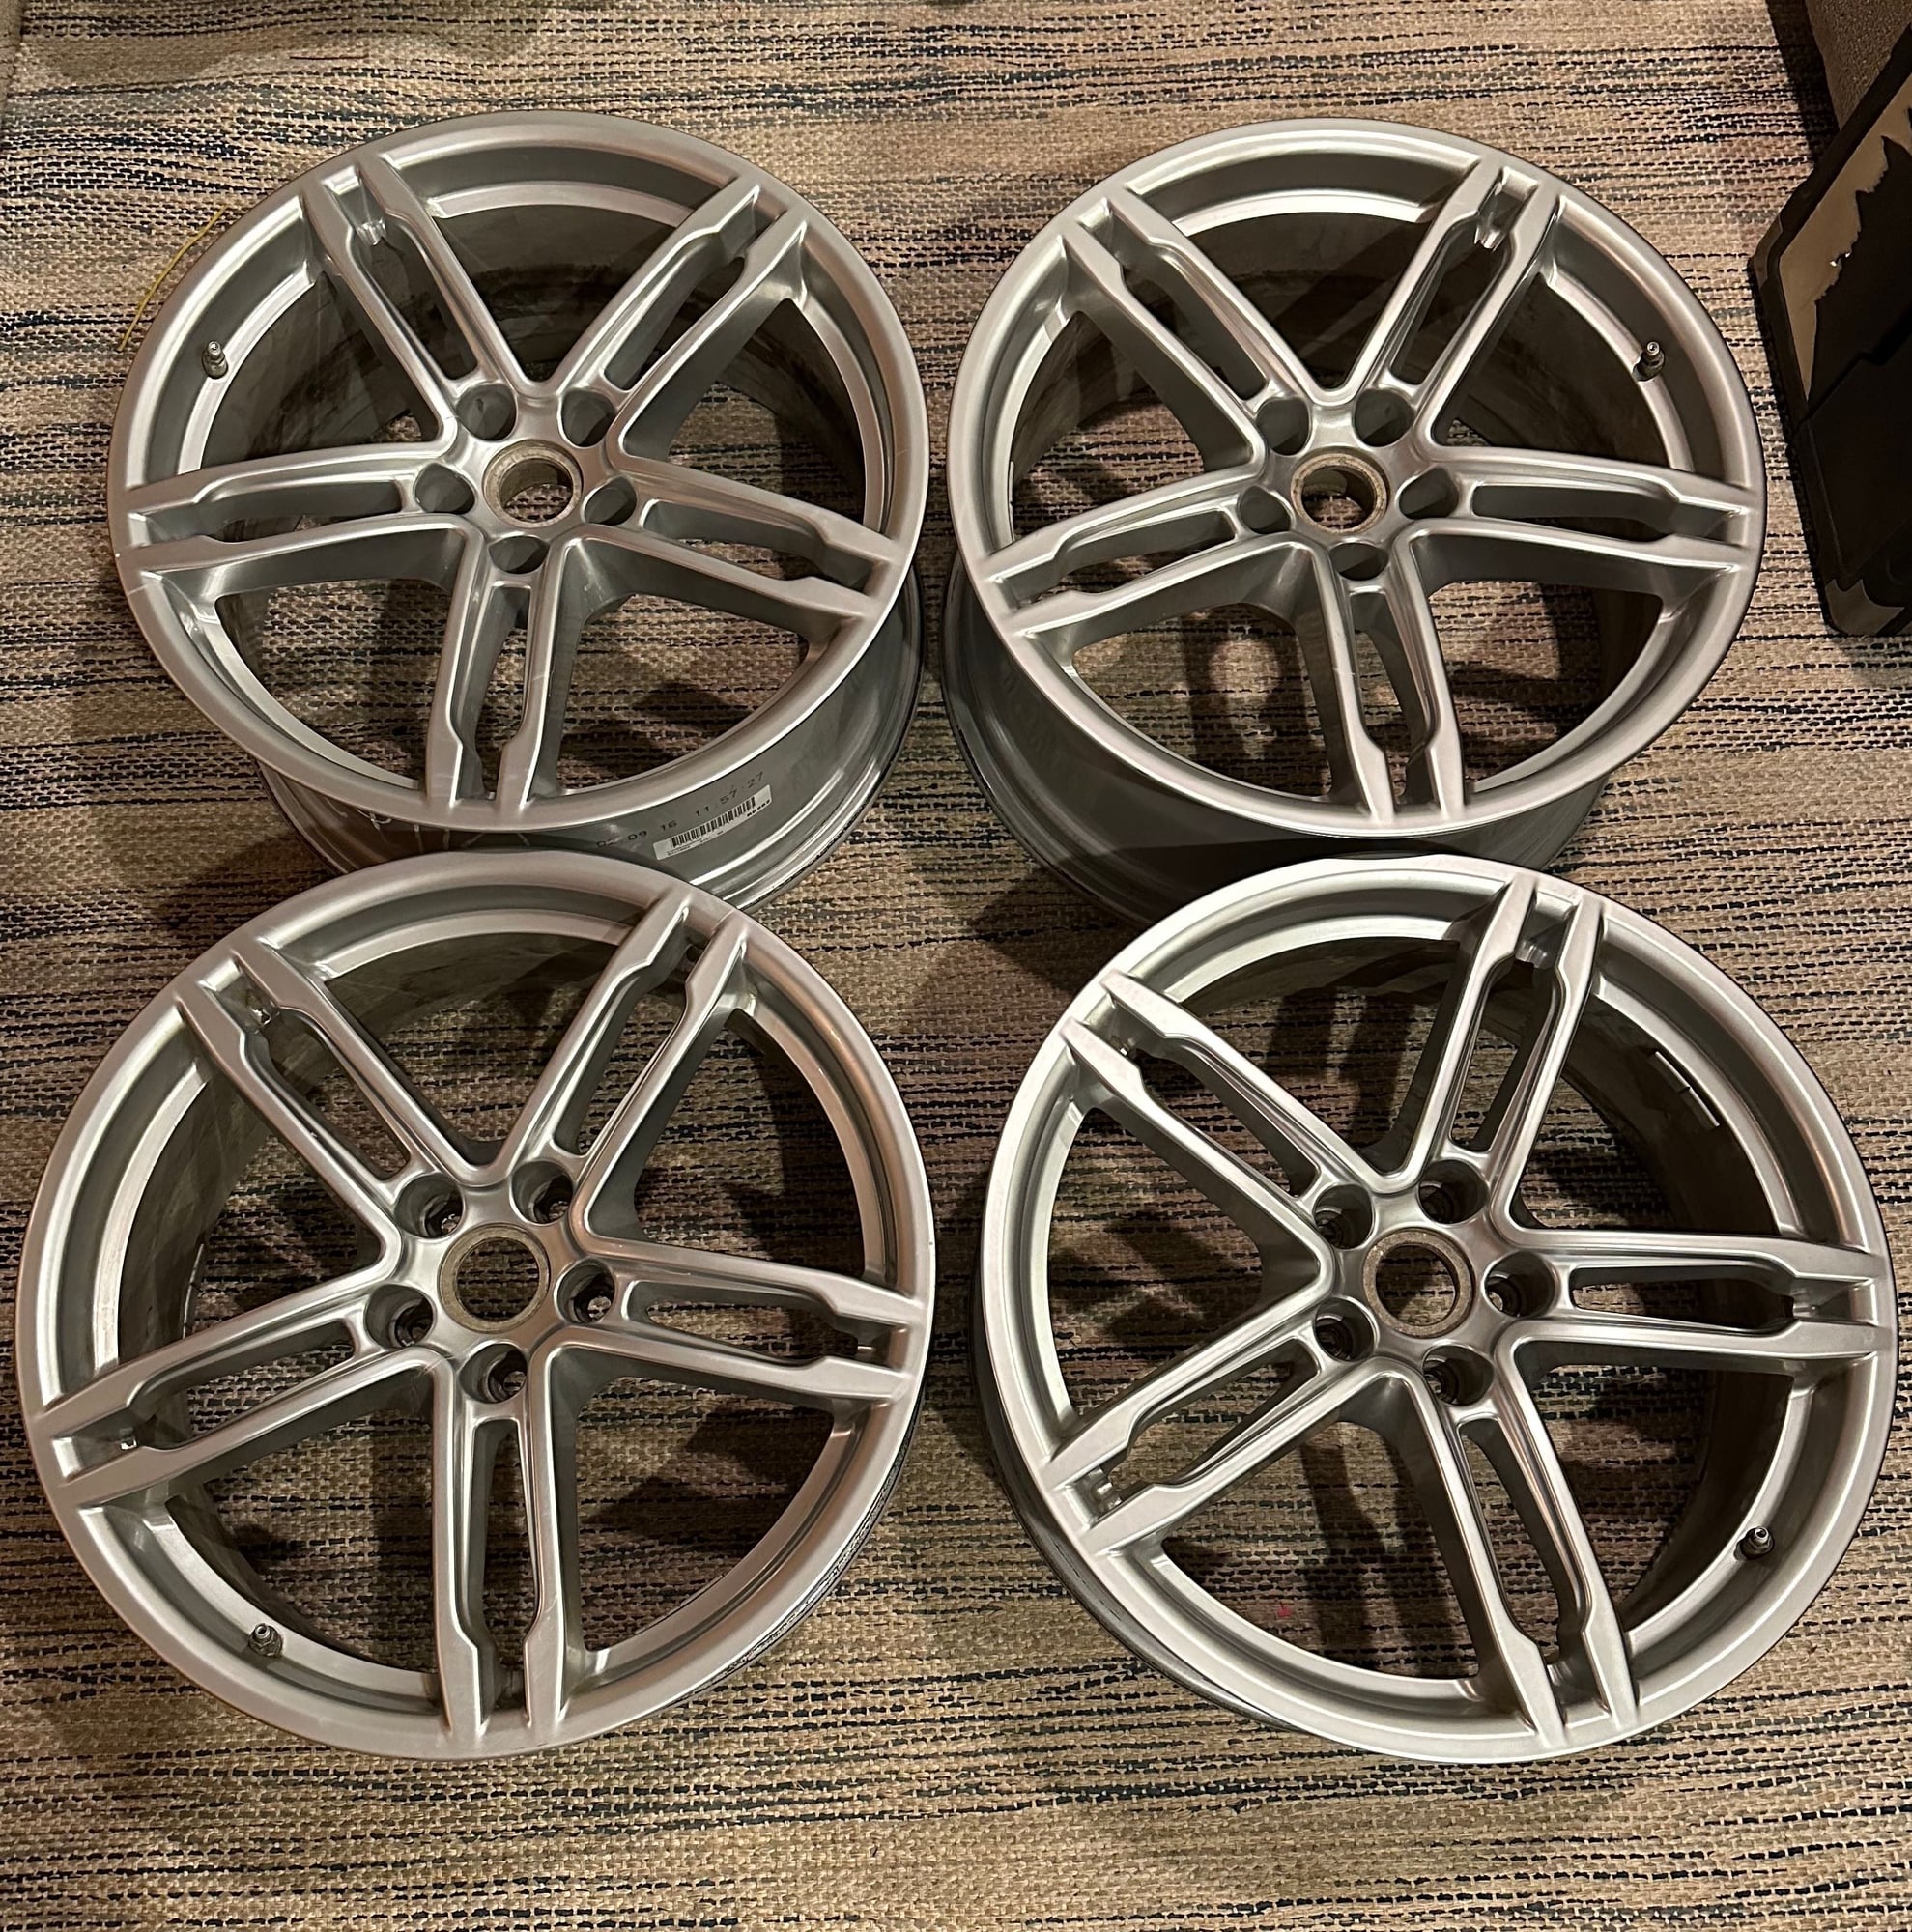 2020 Porsche Cayenne - 19" OEM Porsche Macan Turbo Wheels - Excellent - Macan Turbo S GTS 95B - Wheels and Tires/Axles - $950 - Plymouth, MN 55447, United States